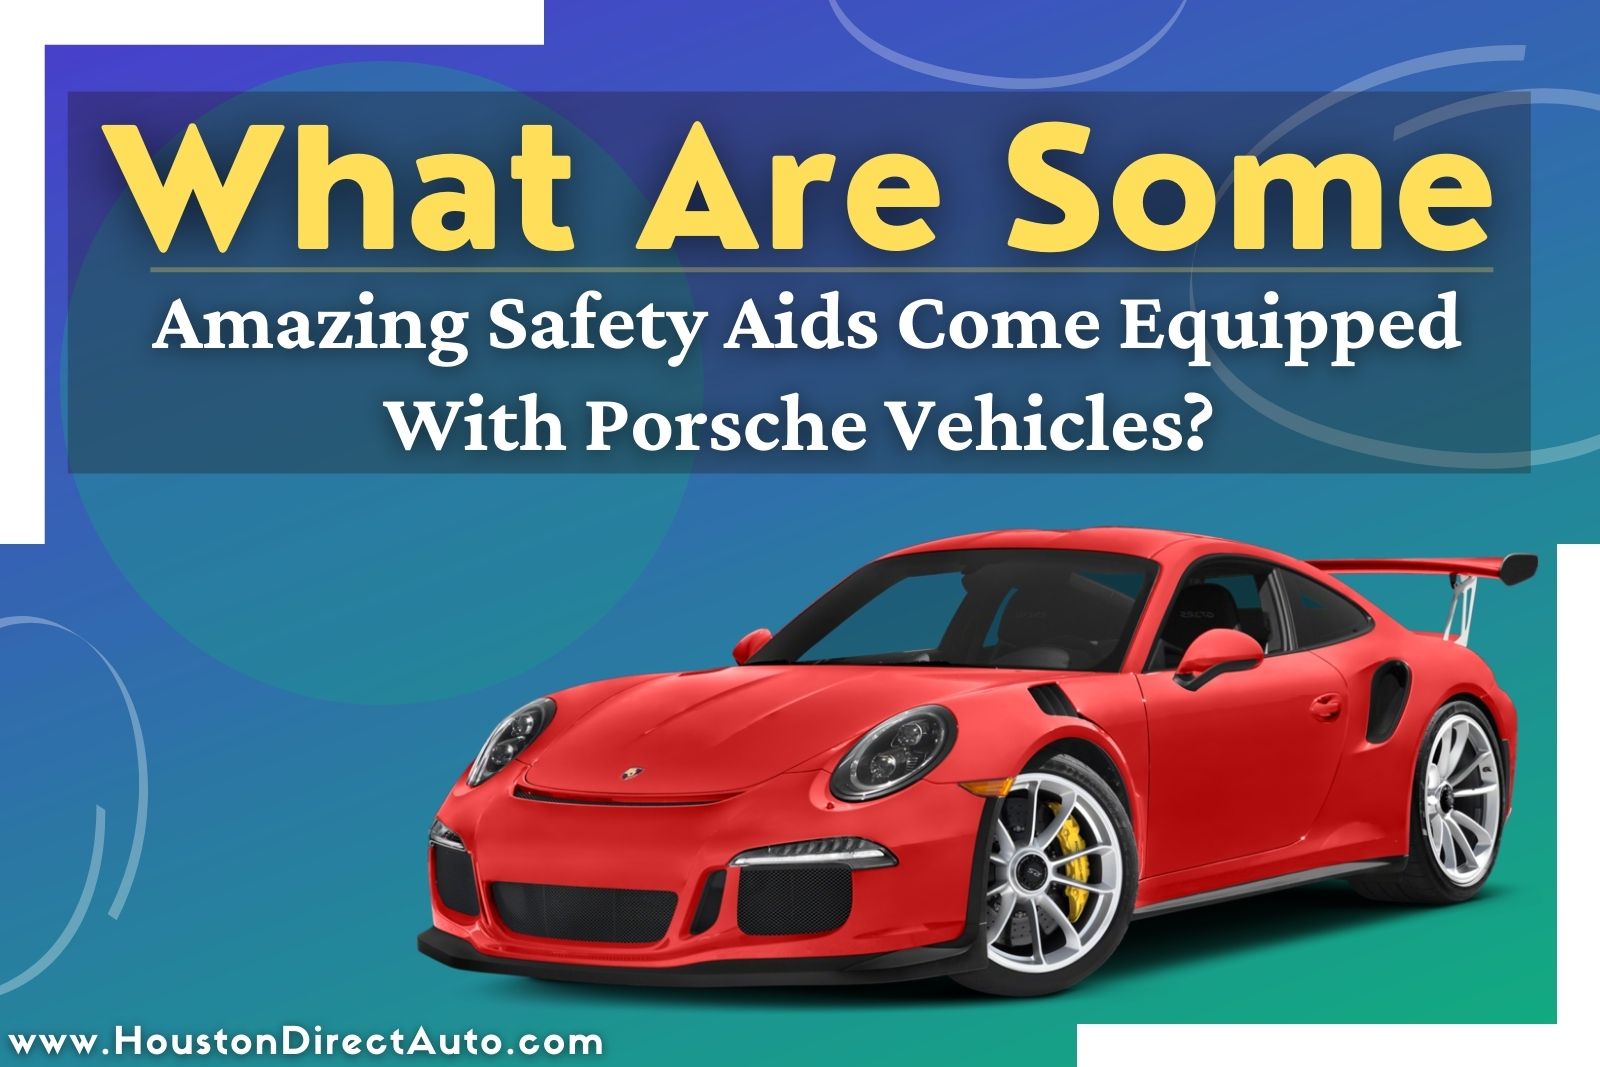 Used Porsche For Sale In Houston TX, Used Vehicles Near Me, Best Used Car Dealerships, Pre Owned Dealerships